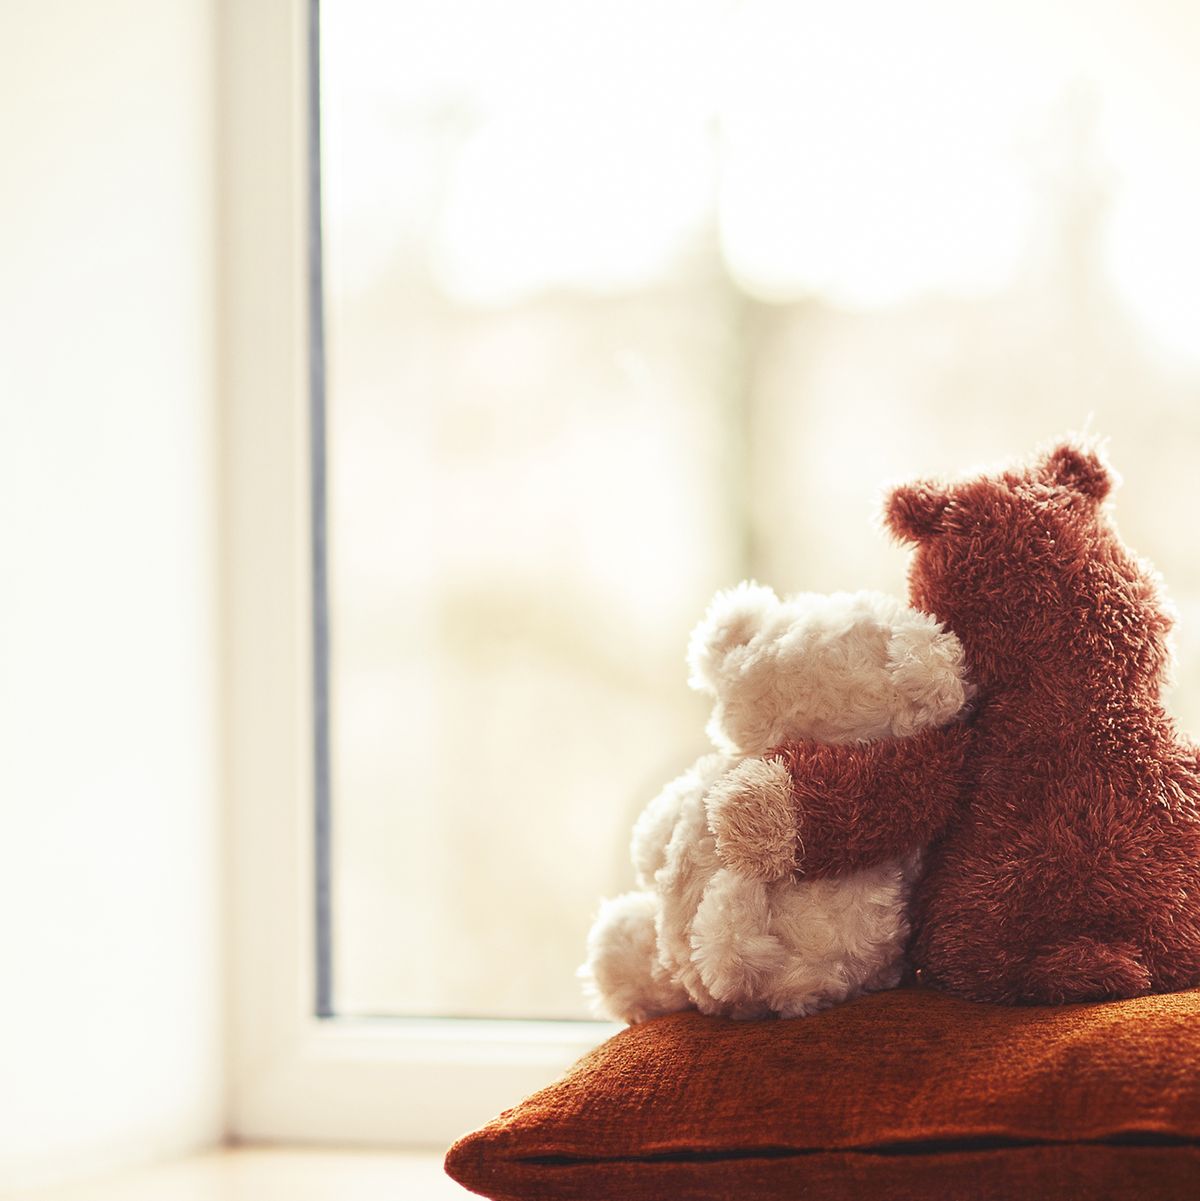 https://hips.hearstapps.com/hmg-prod/images/two-embracing-teddy-bear-toys-sitting-on-window-royalty-free-image-464966359-1548282062.jpg?crop=0.599xw:0.901xh;0.401xw,0.0988xh&resize=1200:*